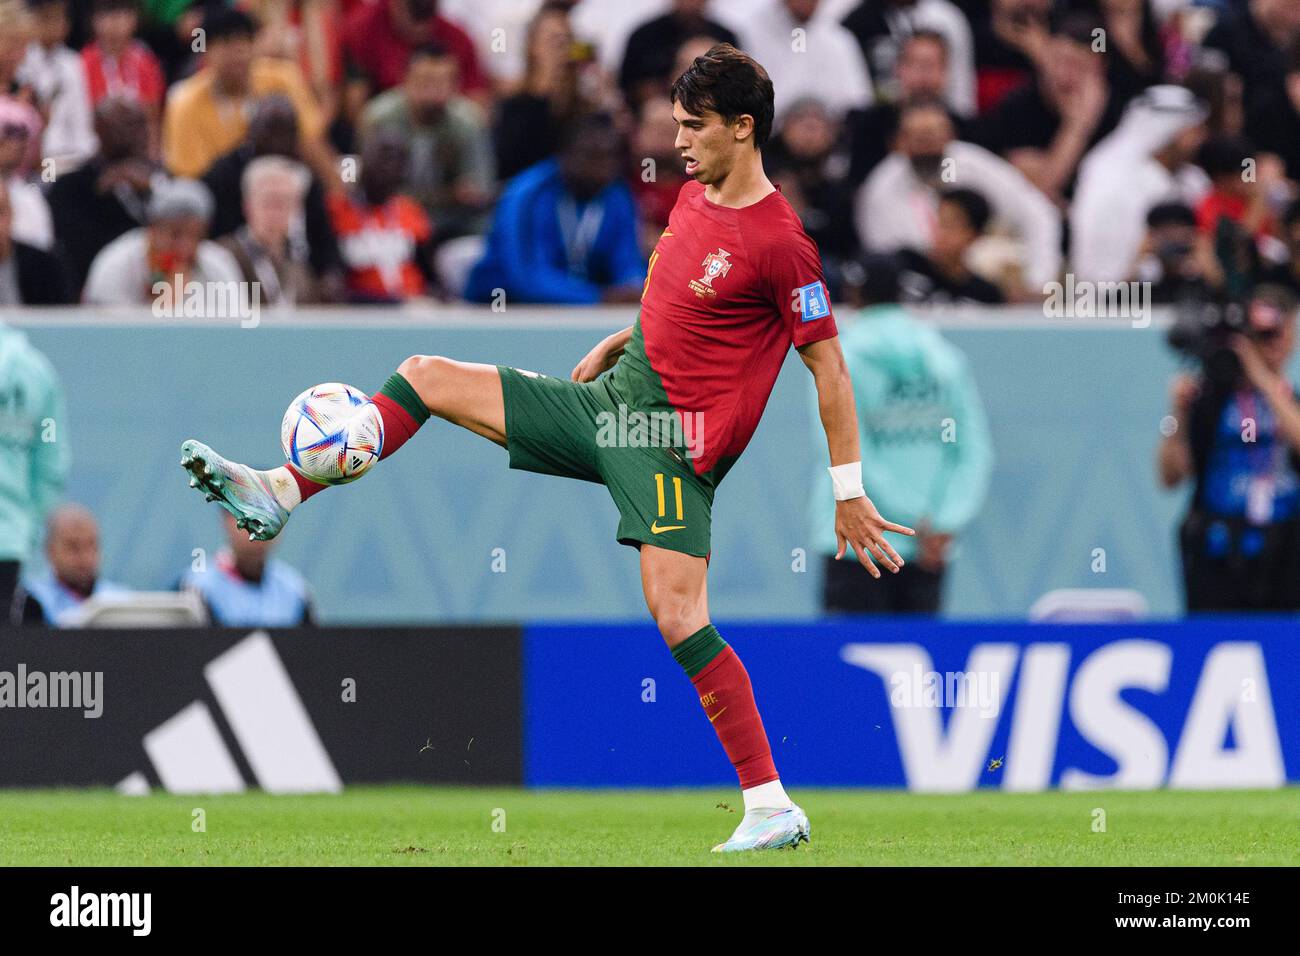 Lusail, Qatar. 06th Dec, 2022. Lusail Stadium Joao Felix of Portugal during the match between Portugal and Switzerland, valid for the round of 16 of the World Cup, held at the Estadio Nacional de Lusail in Lusail, Qatar. (Marcio Machado/SPP) Credit: SPP Sport Press Photo. /Alamy Live News Stock Photo